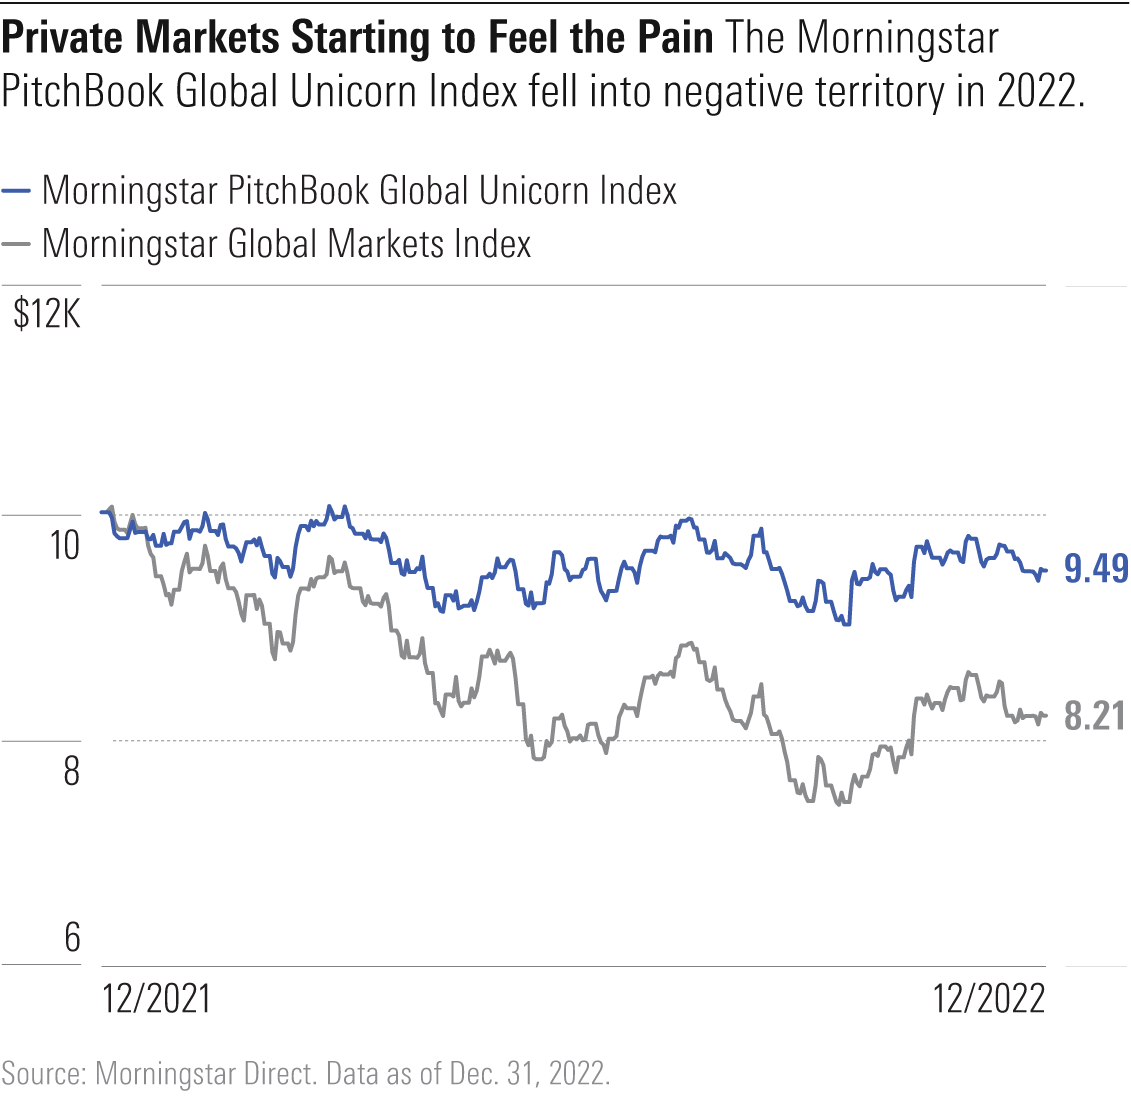 Line chart shows that the Morningstar PitchBook Global Unicorn Index lost value in 2022.